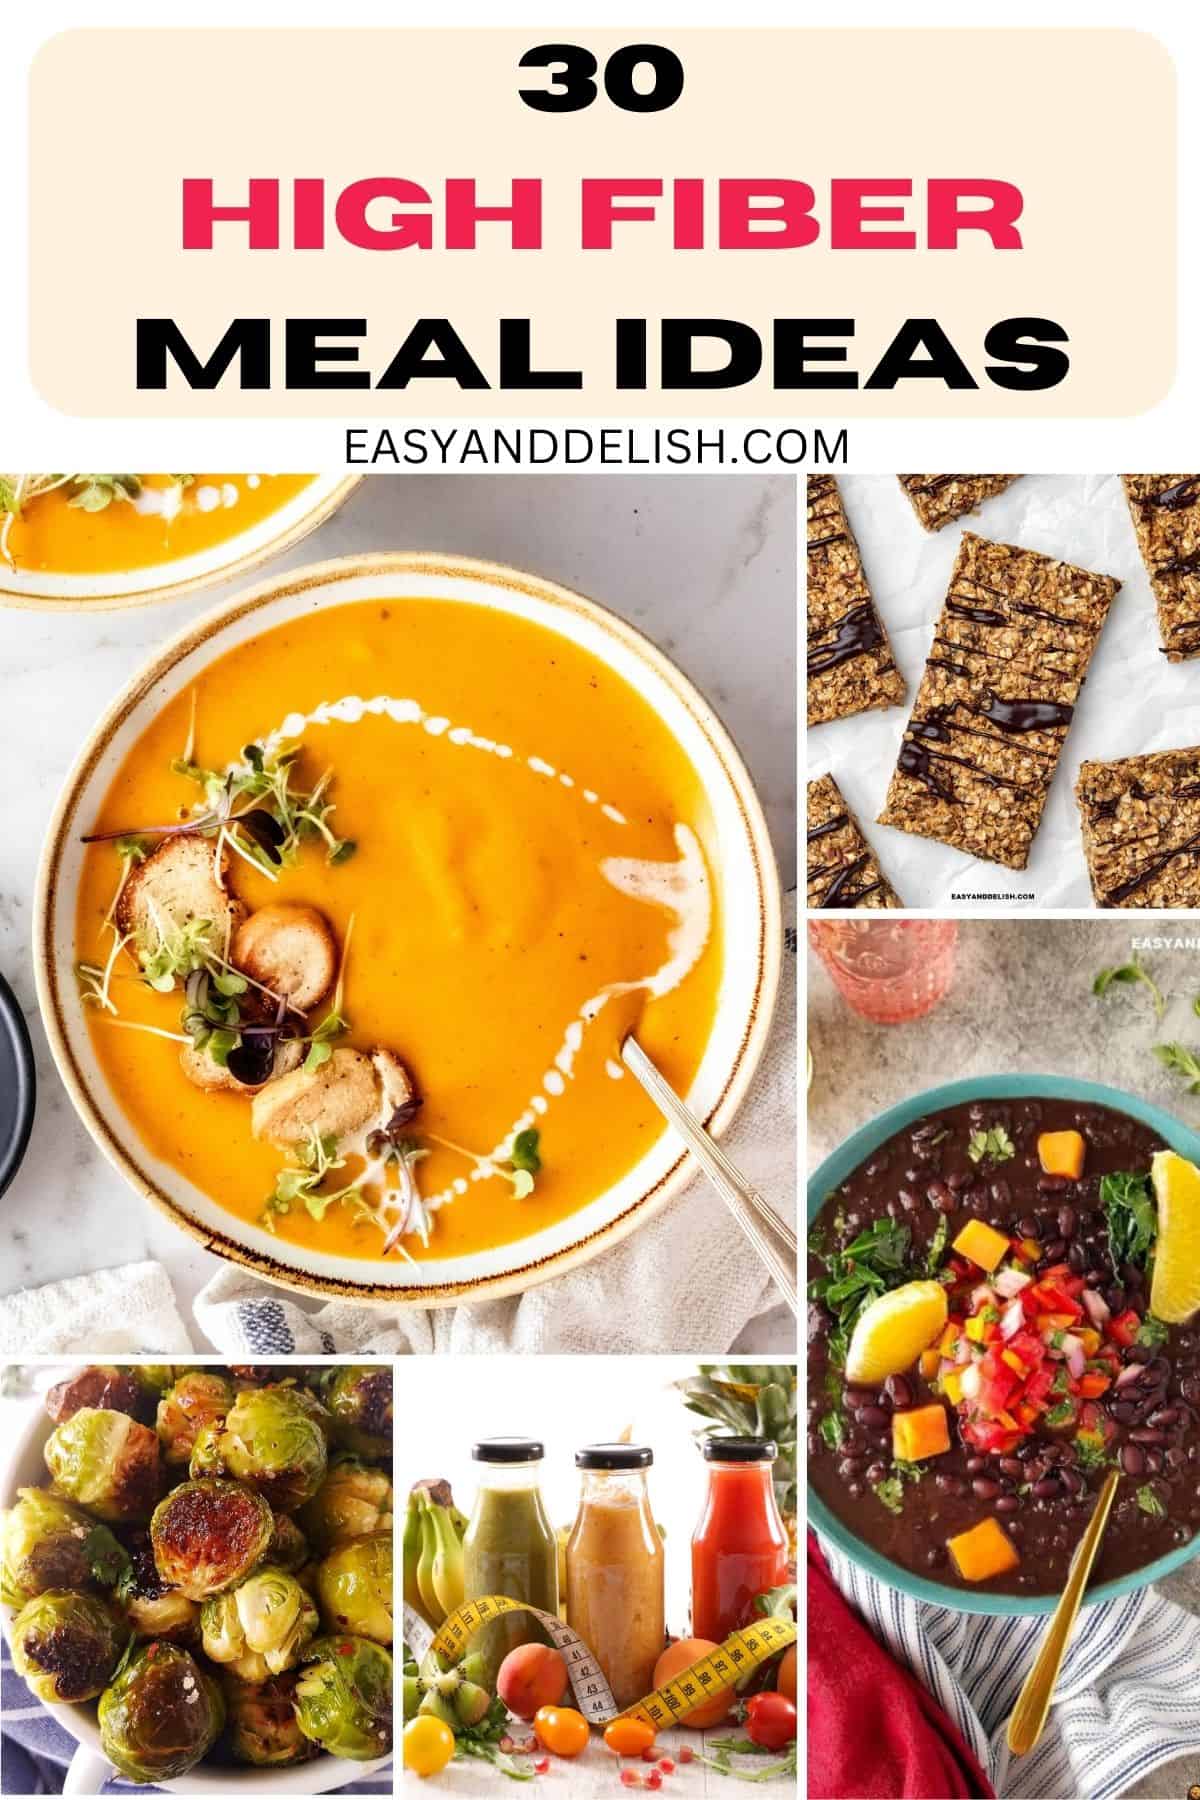 Collage showing healthy recipes for dinner and breakfast.